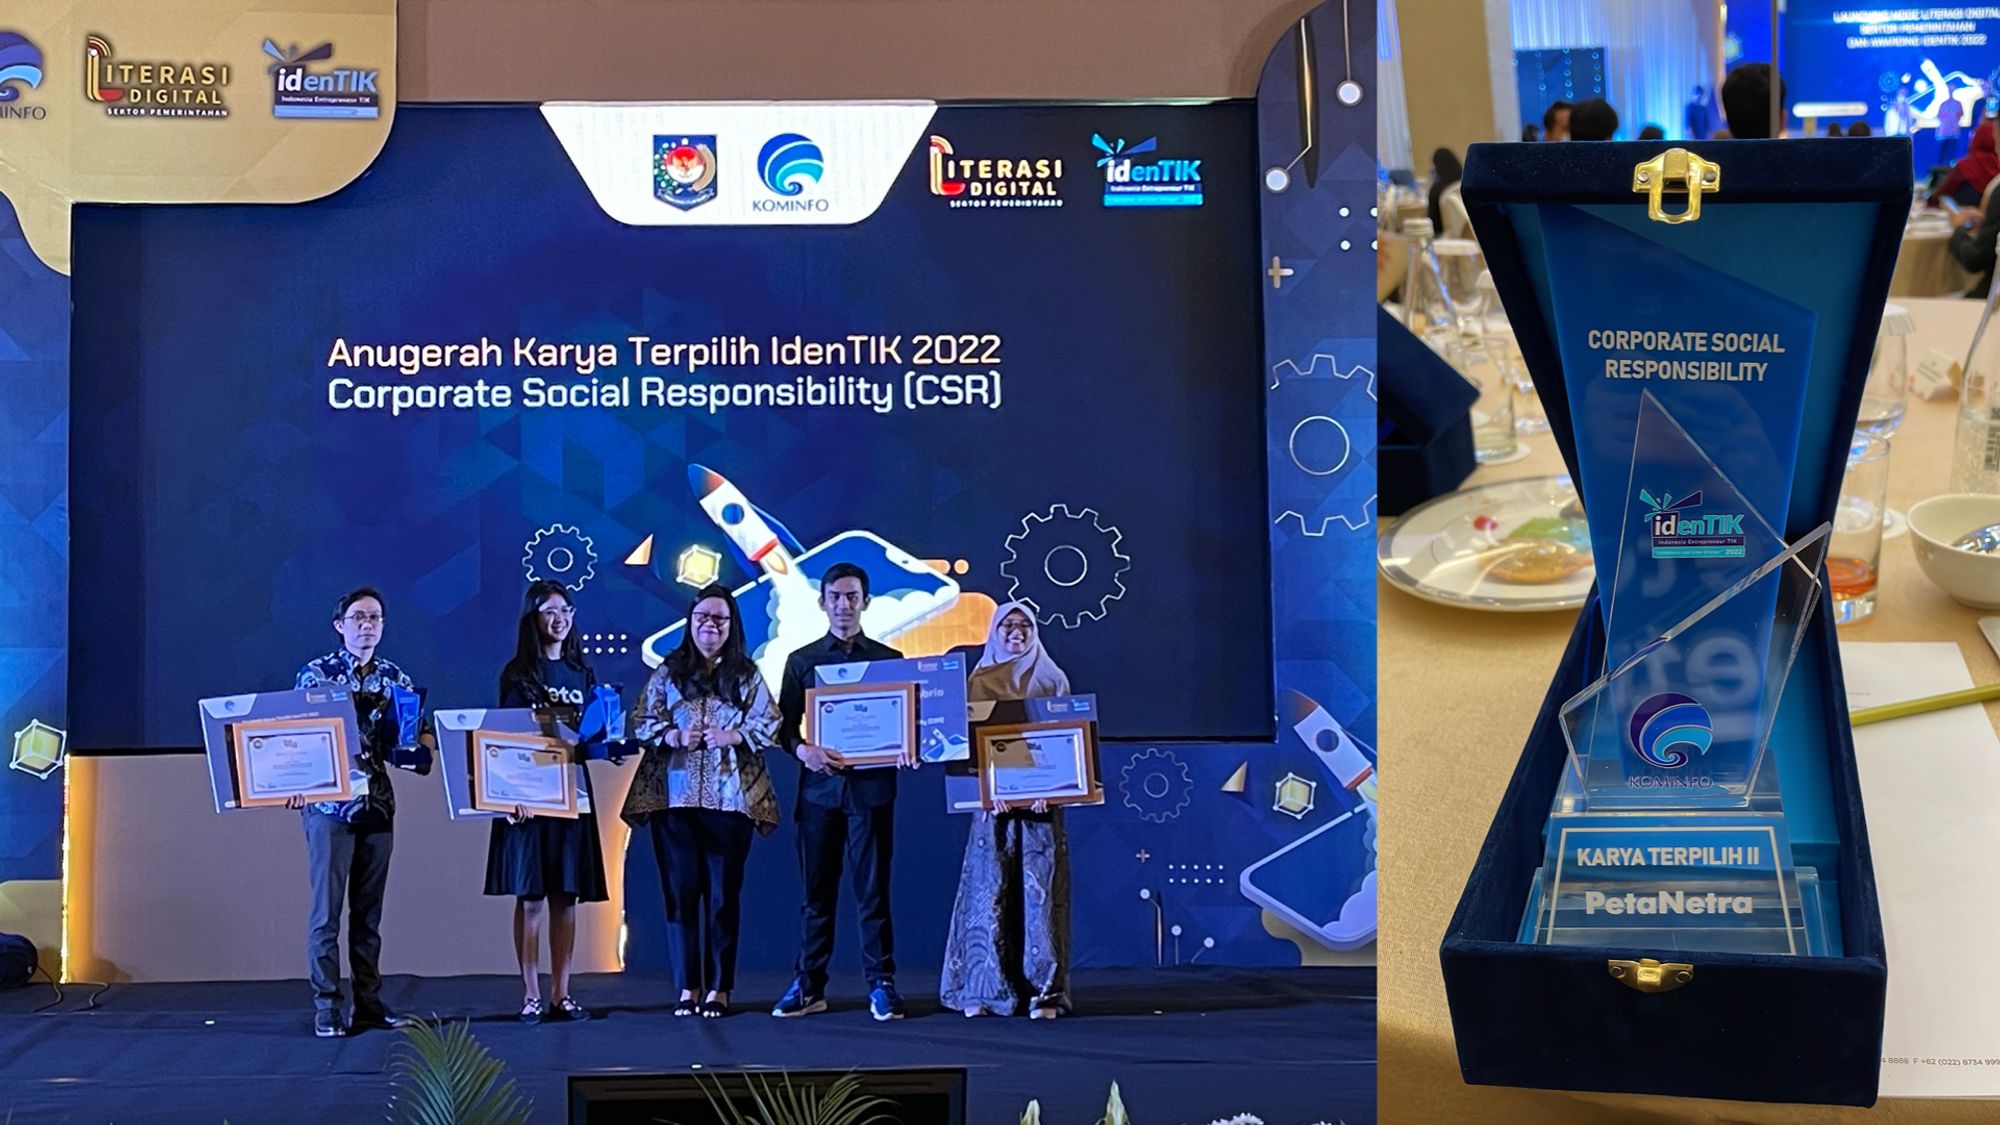 Runner up of IDENTIK (Indonesia Communication and Informatics Competition) 2022